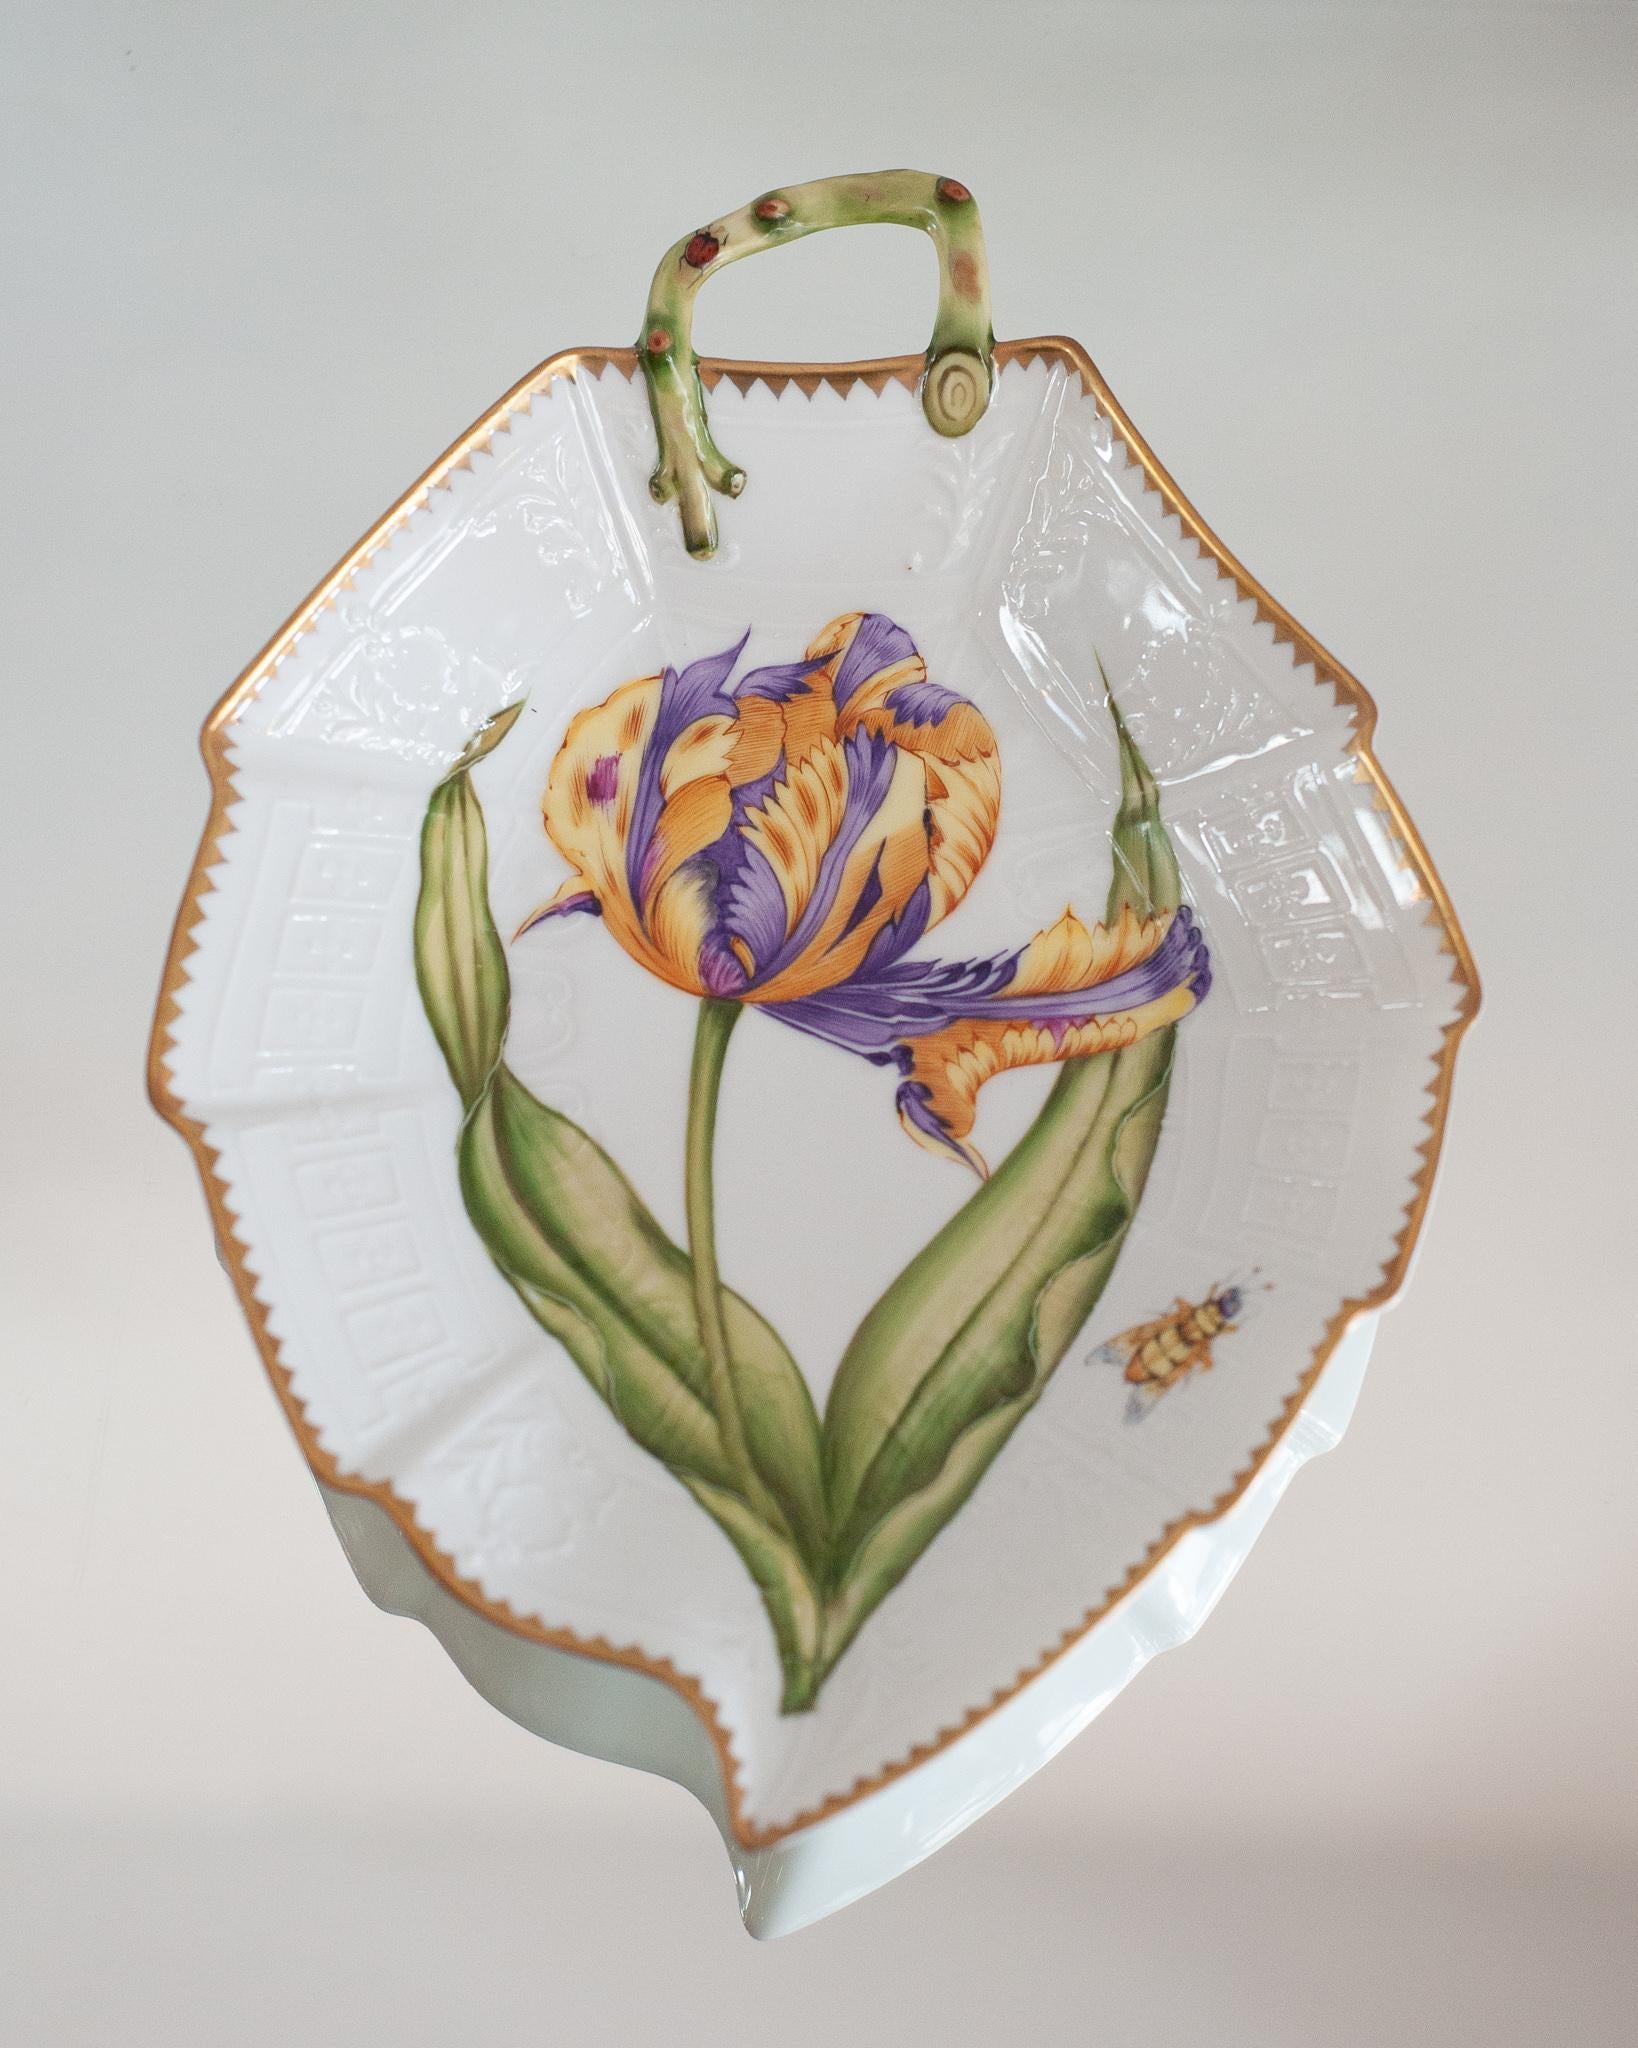 A beautiful hand painted leaf-shaped serving tray with handle, by Anna Weatherley Designs. Anna Weatherley has been designing and producing Fine Botanical Hand Painted Porcelain in Hungary for 30 years.